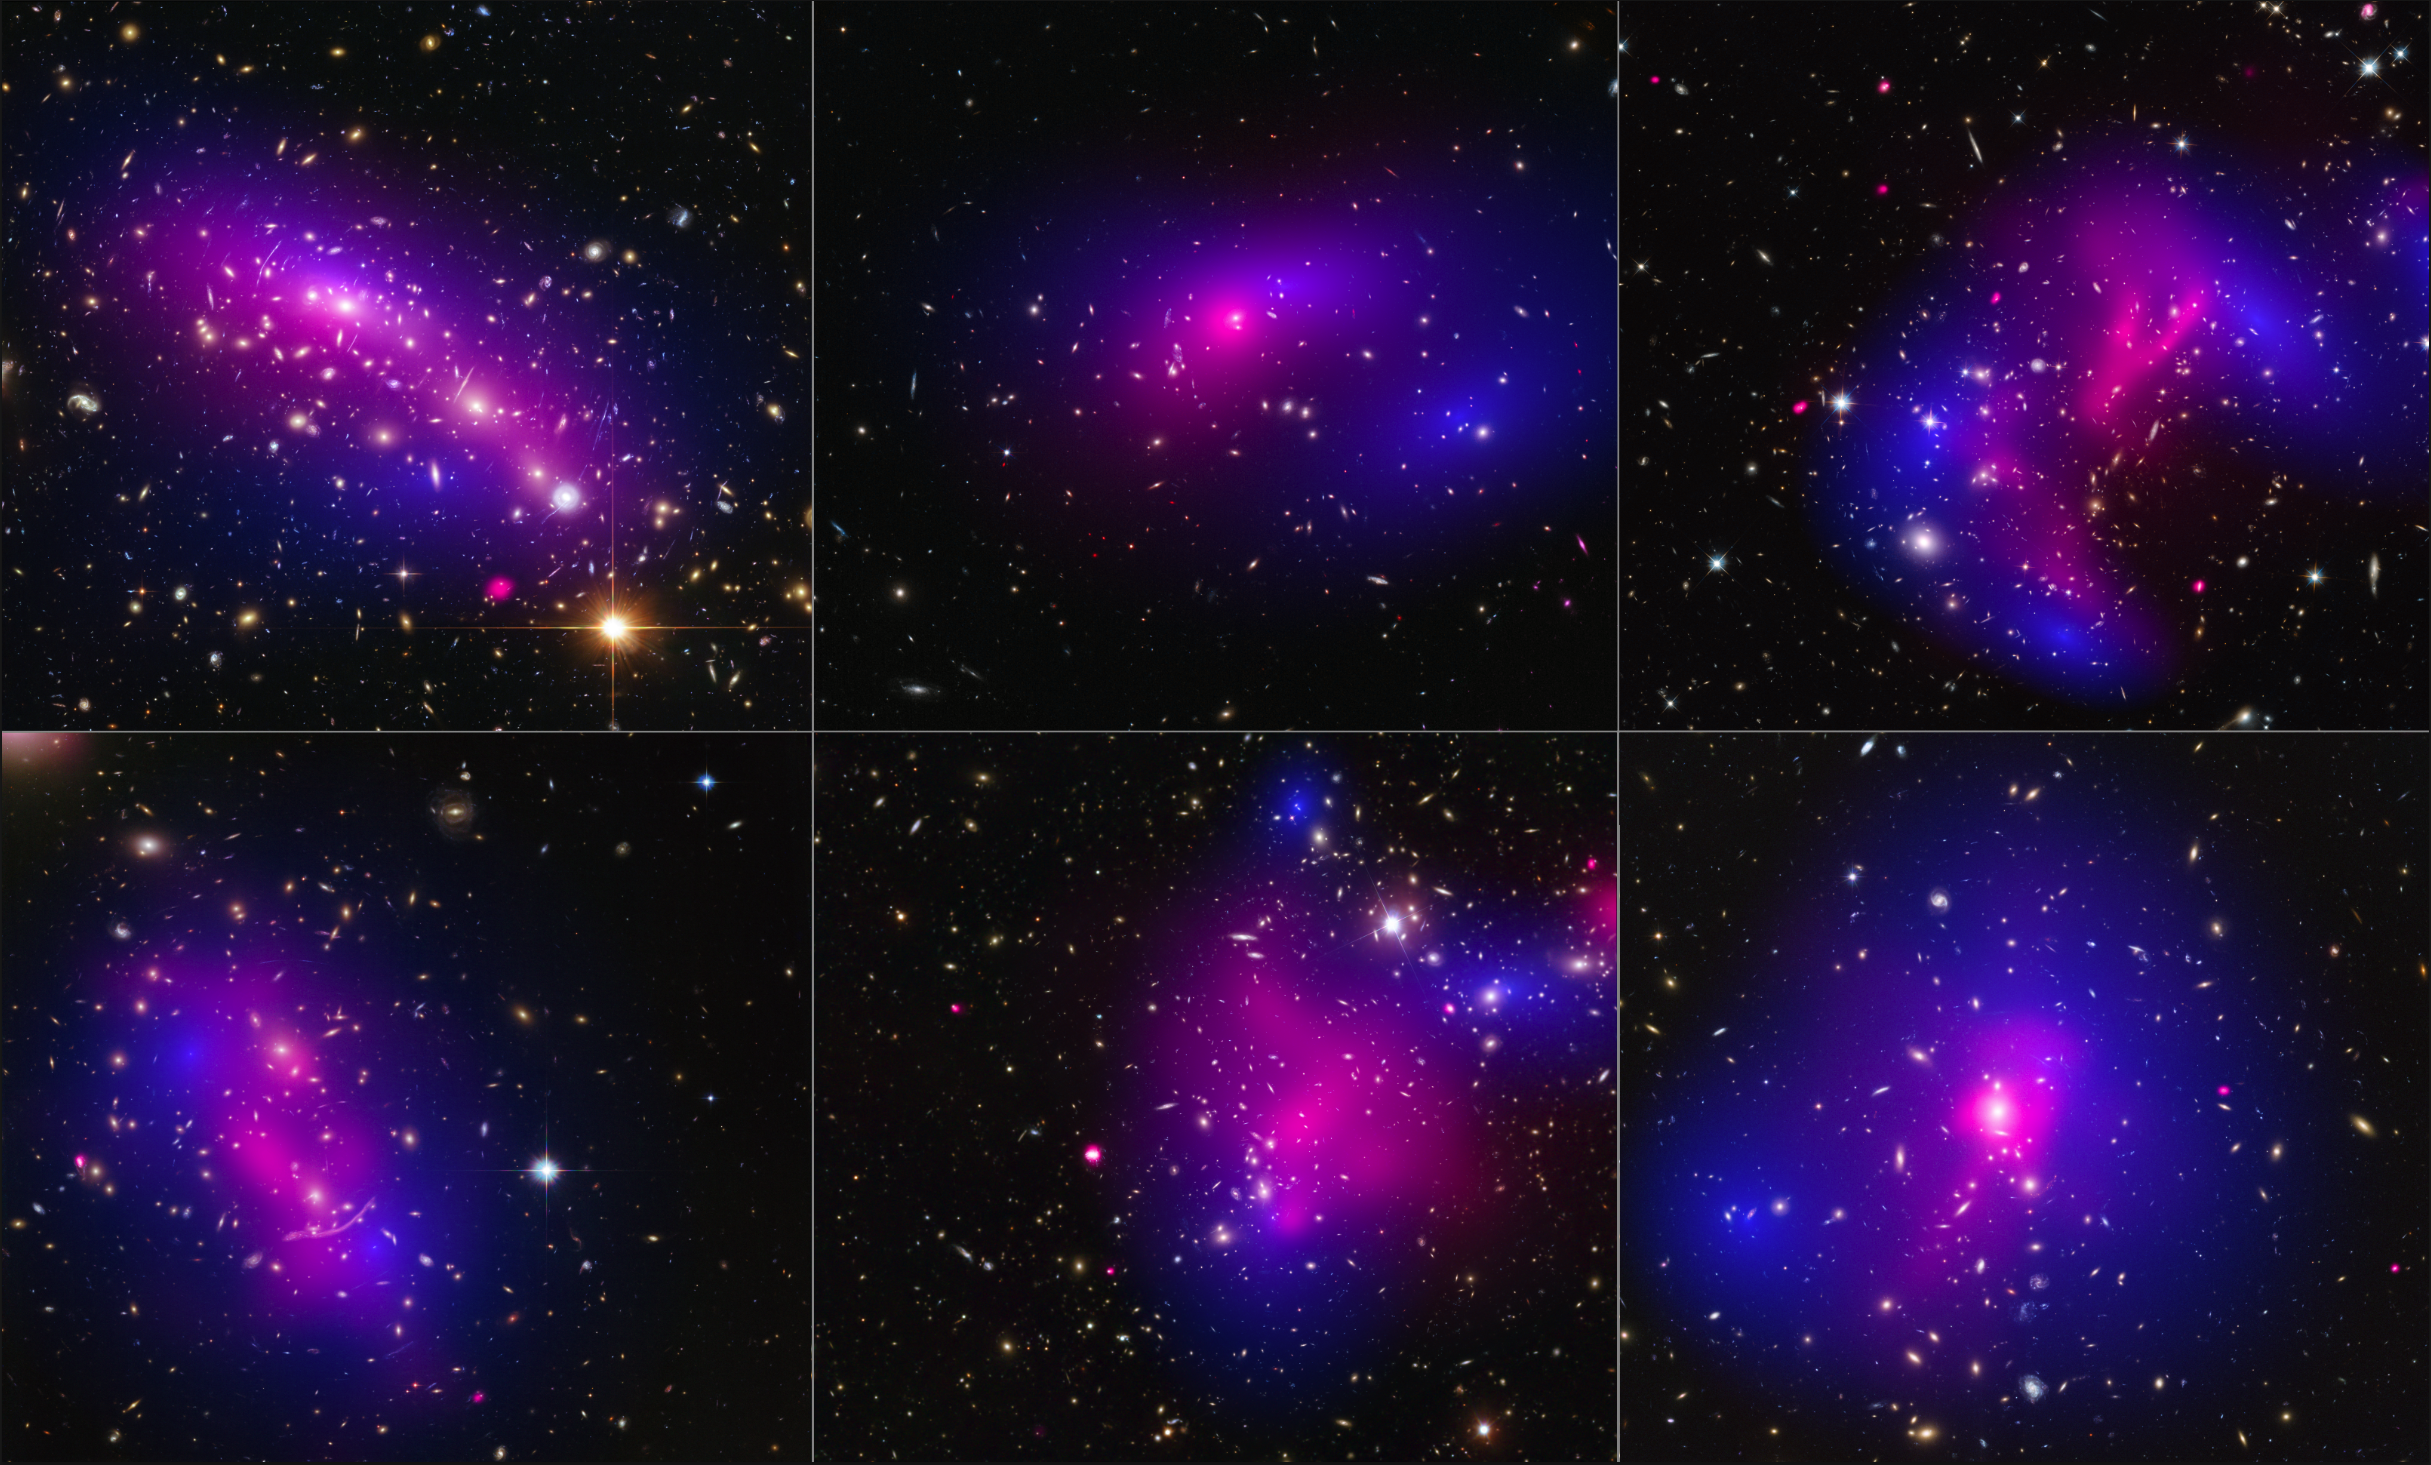 Six panels of images of galaxy clusters. Each cluster has a pink and blue glow that maps the distribution of stars and dark matter (blue) and the presence of X-ray emission from impacted gas (pink).